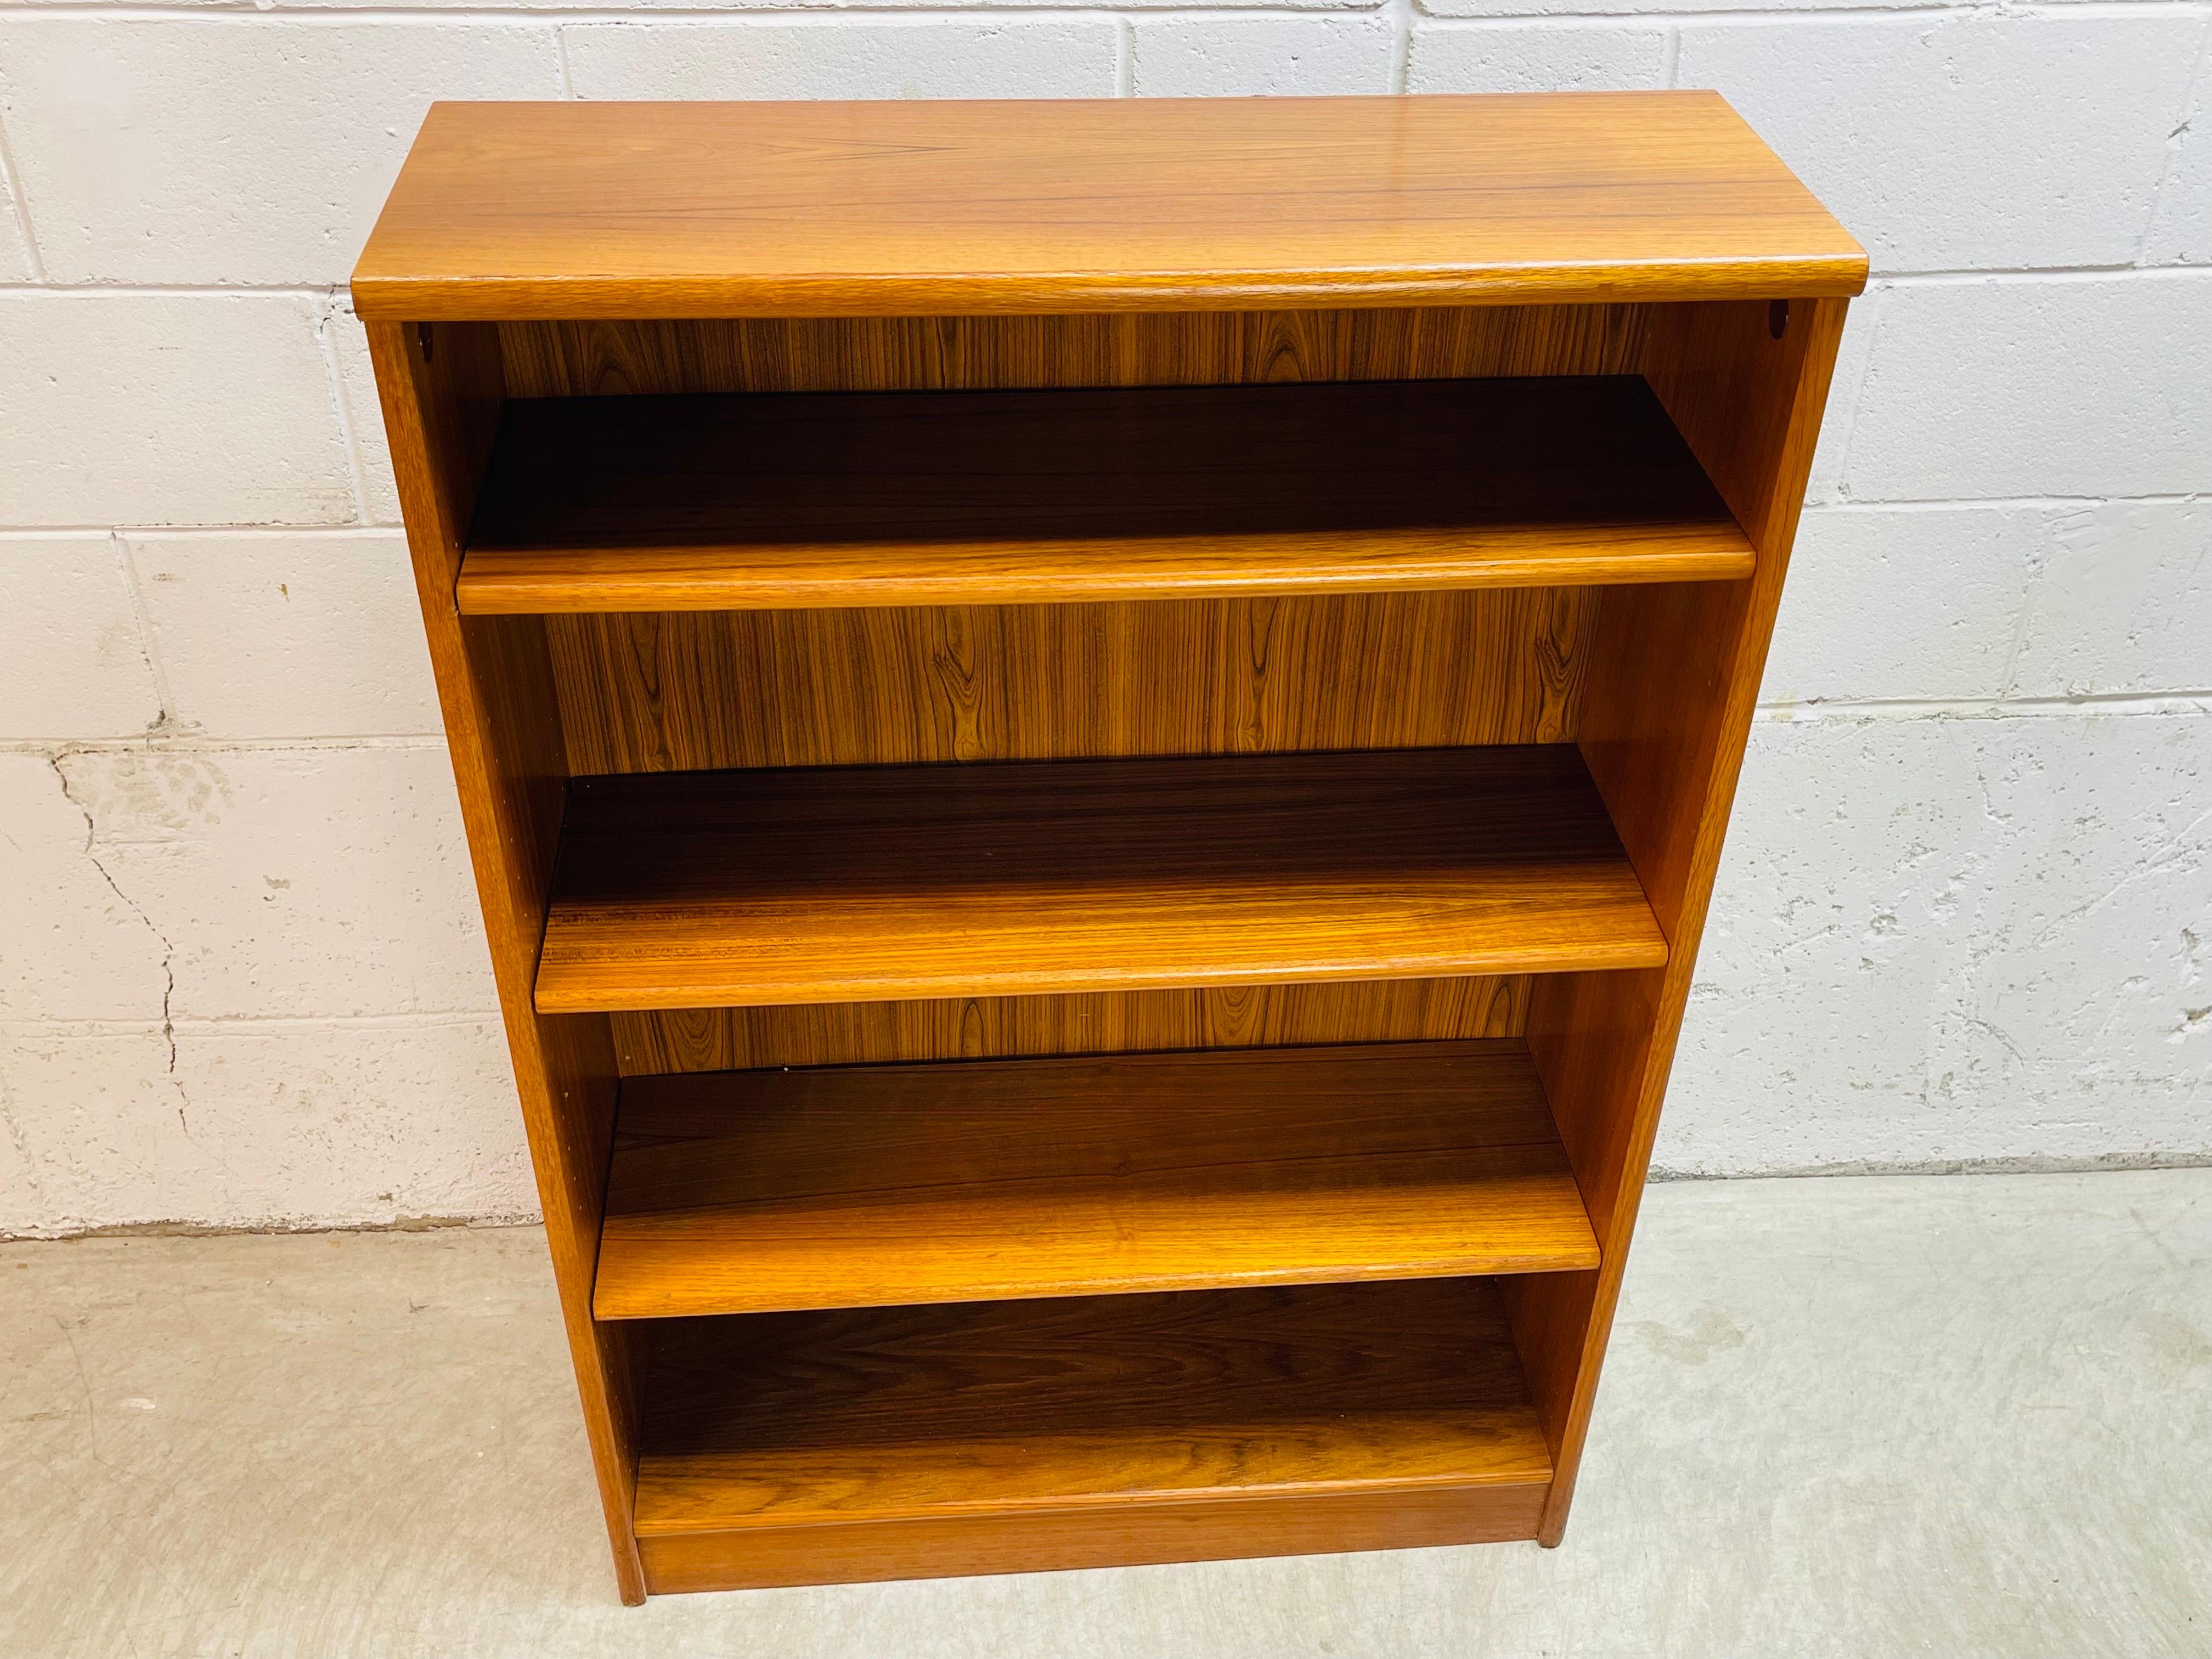 Vintage 1970s teak wood Danish bookcase. The bookcase has adjustable shelves. It has been restored and is strong and sturdy. There is some discoloration to the wood on one side. Marked.